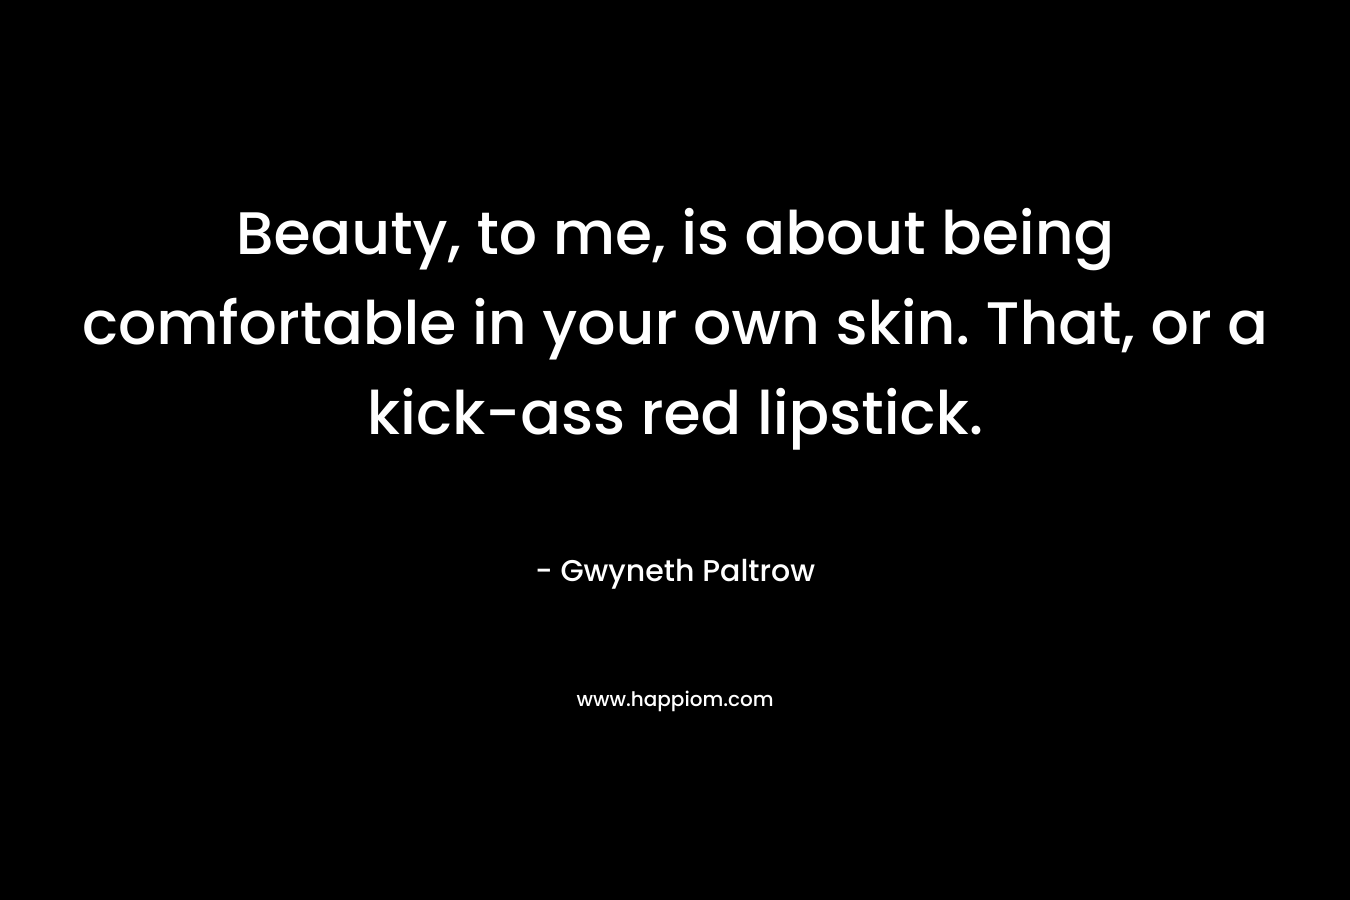 Beauty, to me, is about being comfortable in your own skin. That, or a kick-ass red lipstick. – Gwyneth Paltrow